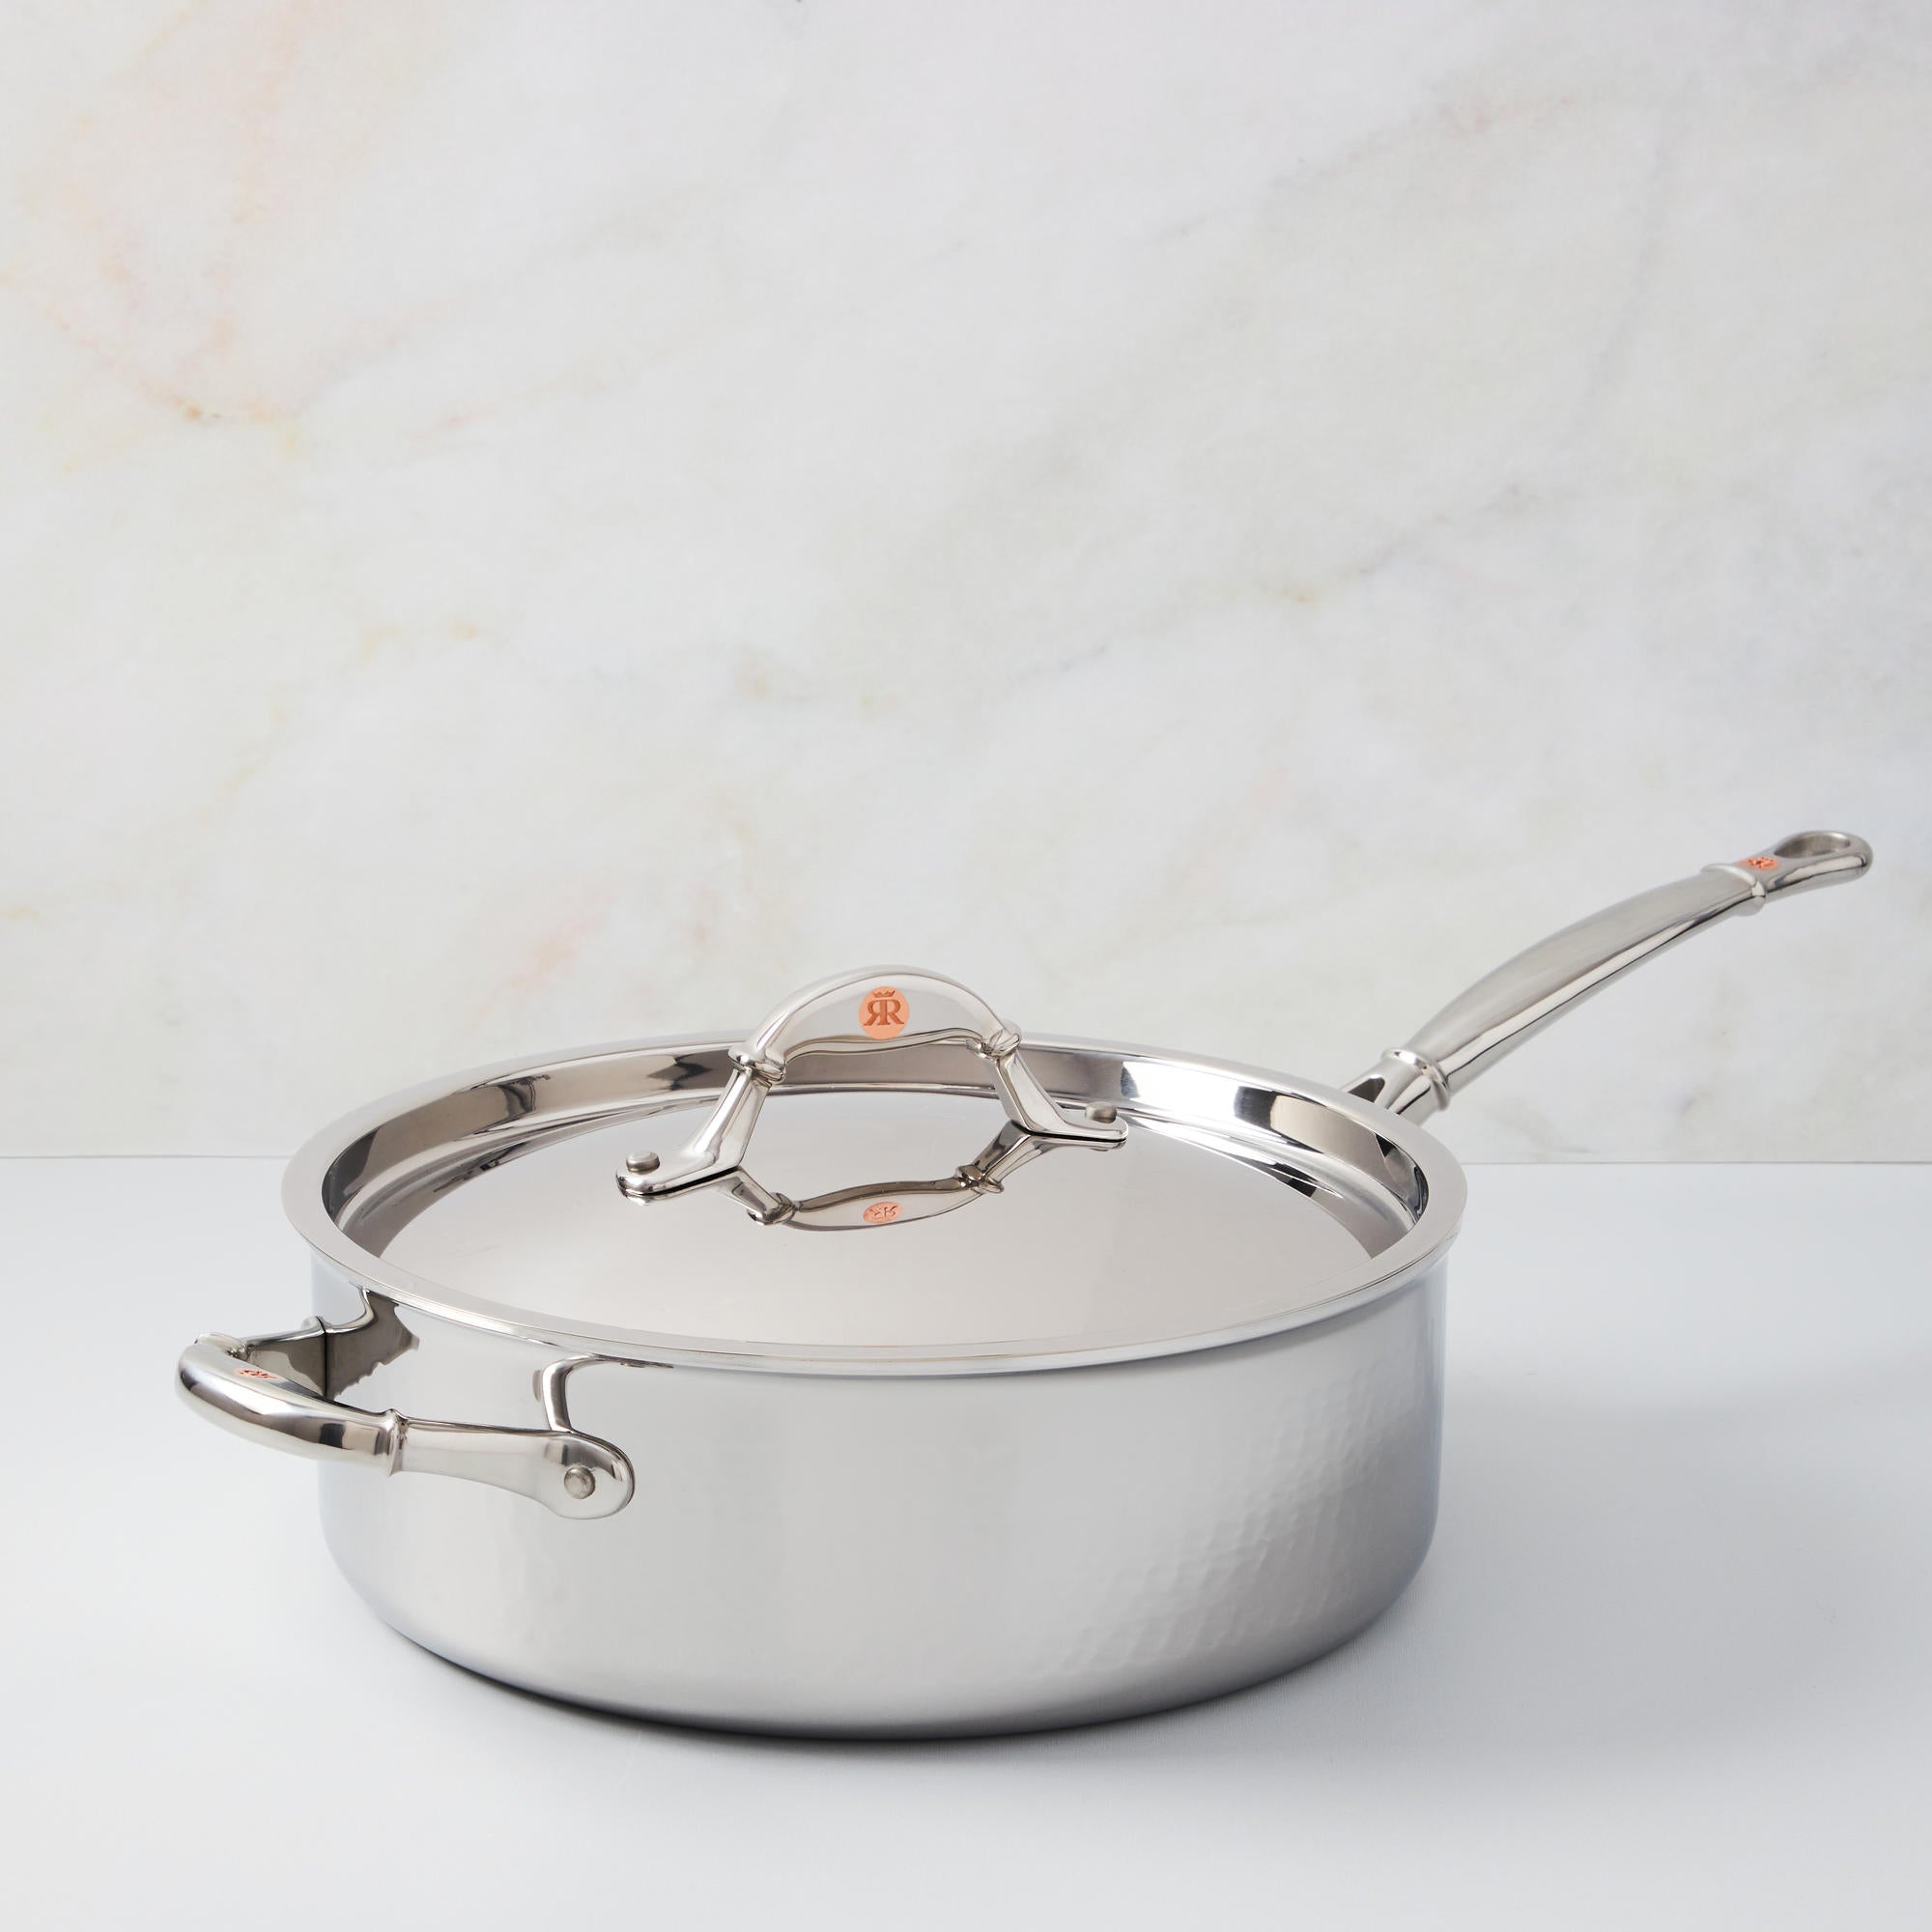 Ruffoni Symphonia Prima Braiser, hand hammered clad stainless steel ...